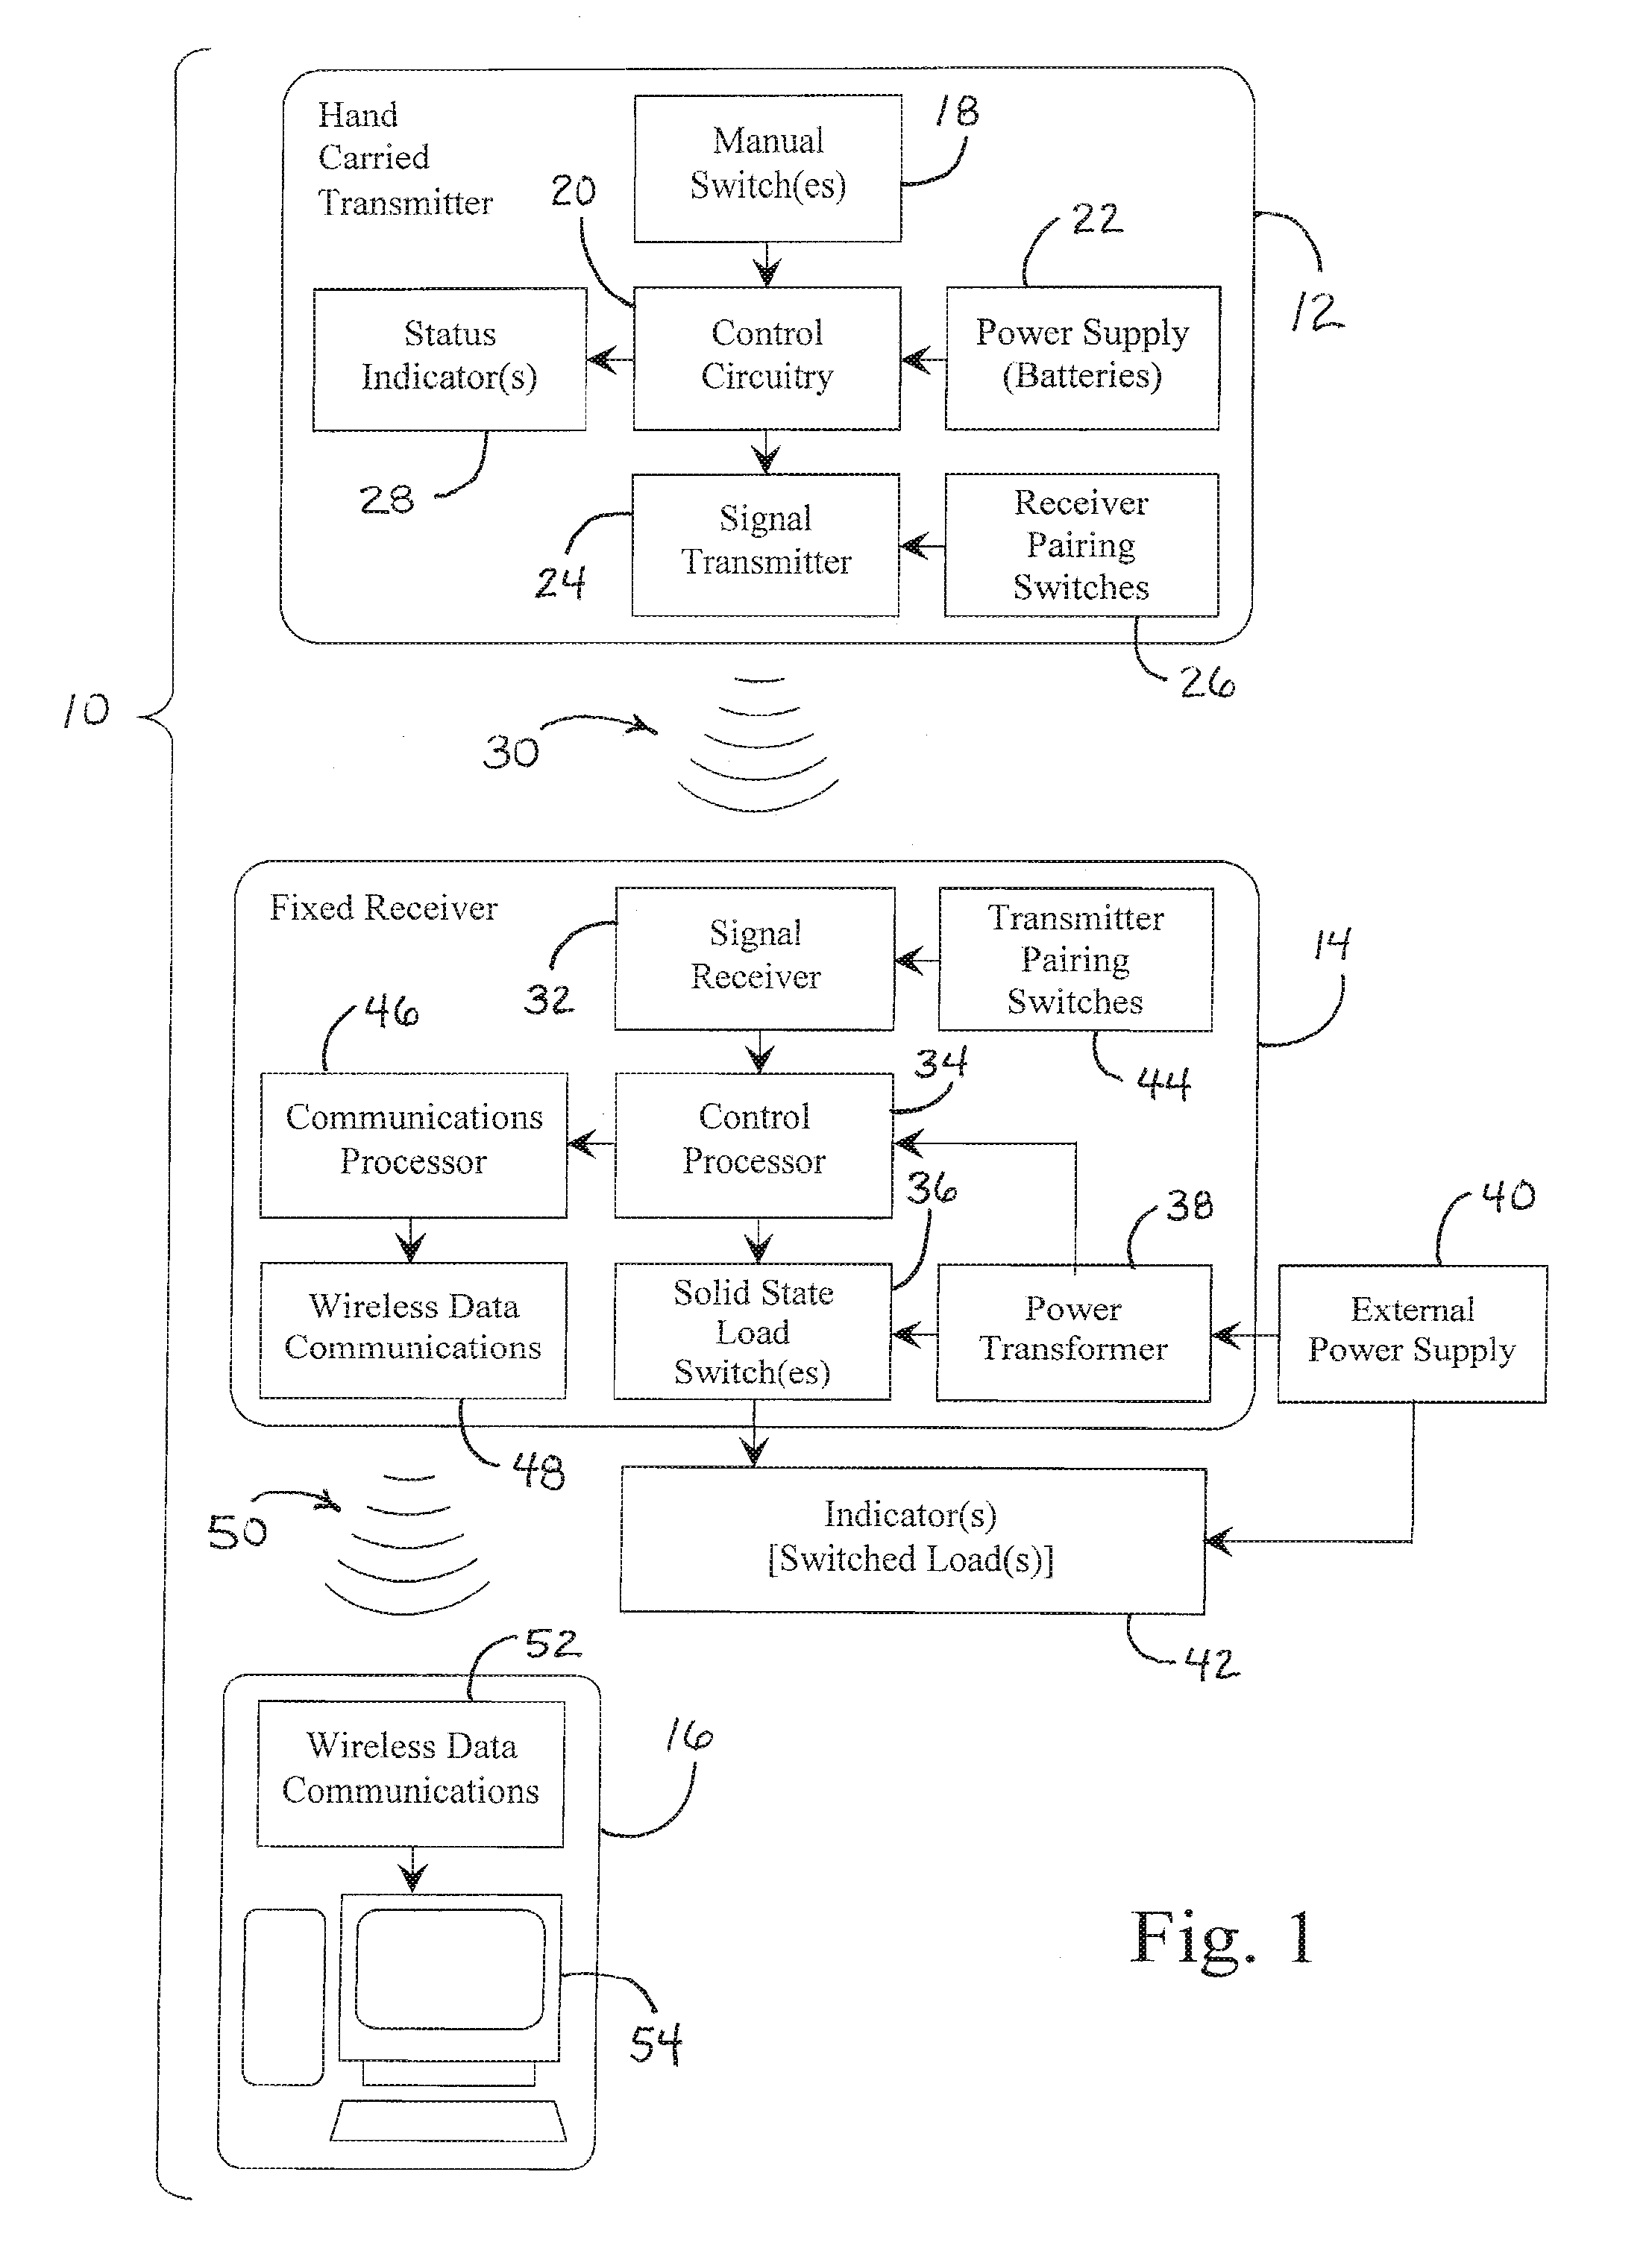 System for Wireless Activation of Communication Indicators within an Industrial or Professional Working Environment